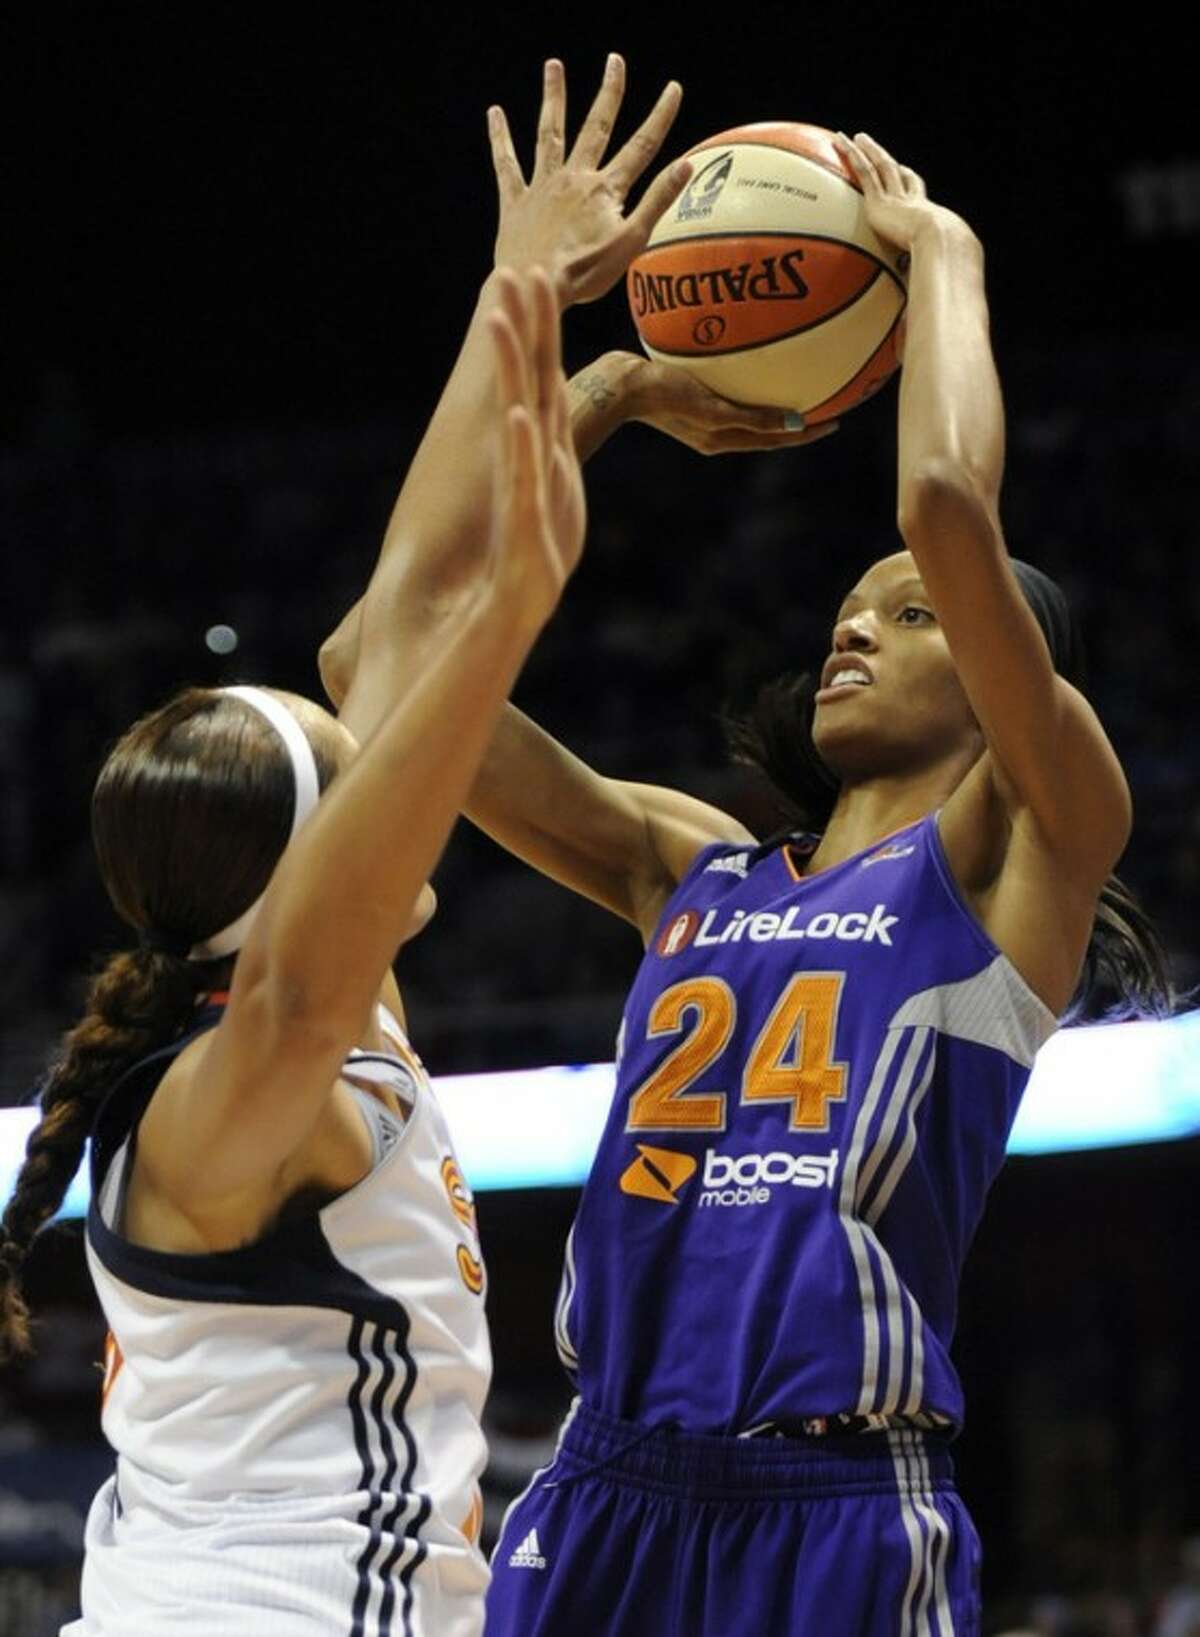 Phoenix Mercury's DeWanna Bonner (24) shoots over Connecticut Sun's Mistie Mims in the second half of a WNBA basketball game in Uncasville, Conn., Friday, Sept. 7, 2012. Bonner was top scorer for Phoenix with 35 points as Phoenix topped Connecticut 91-82. (AP Photo/Jessica Hill)